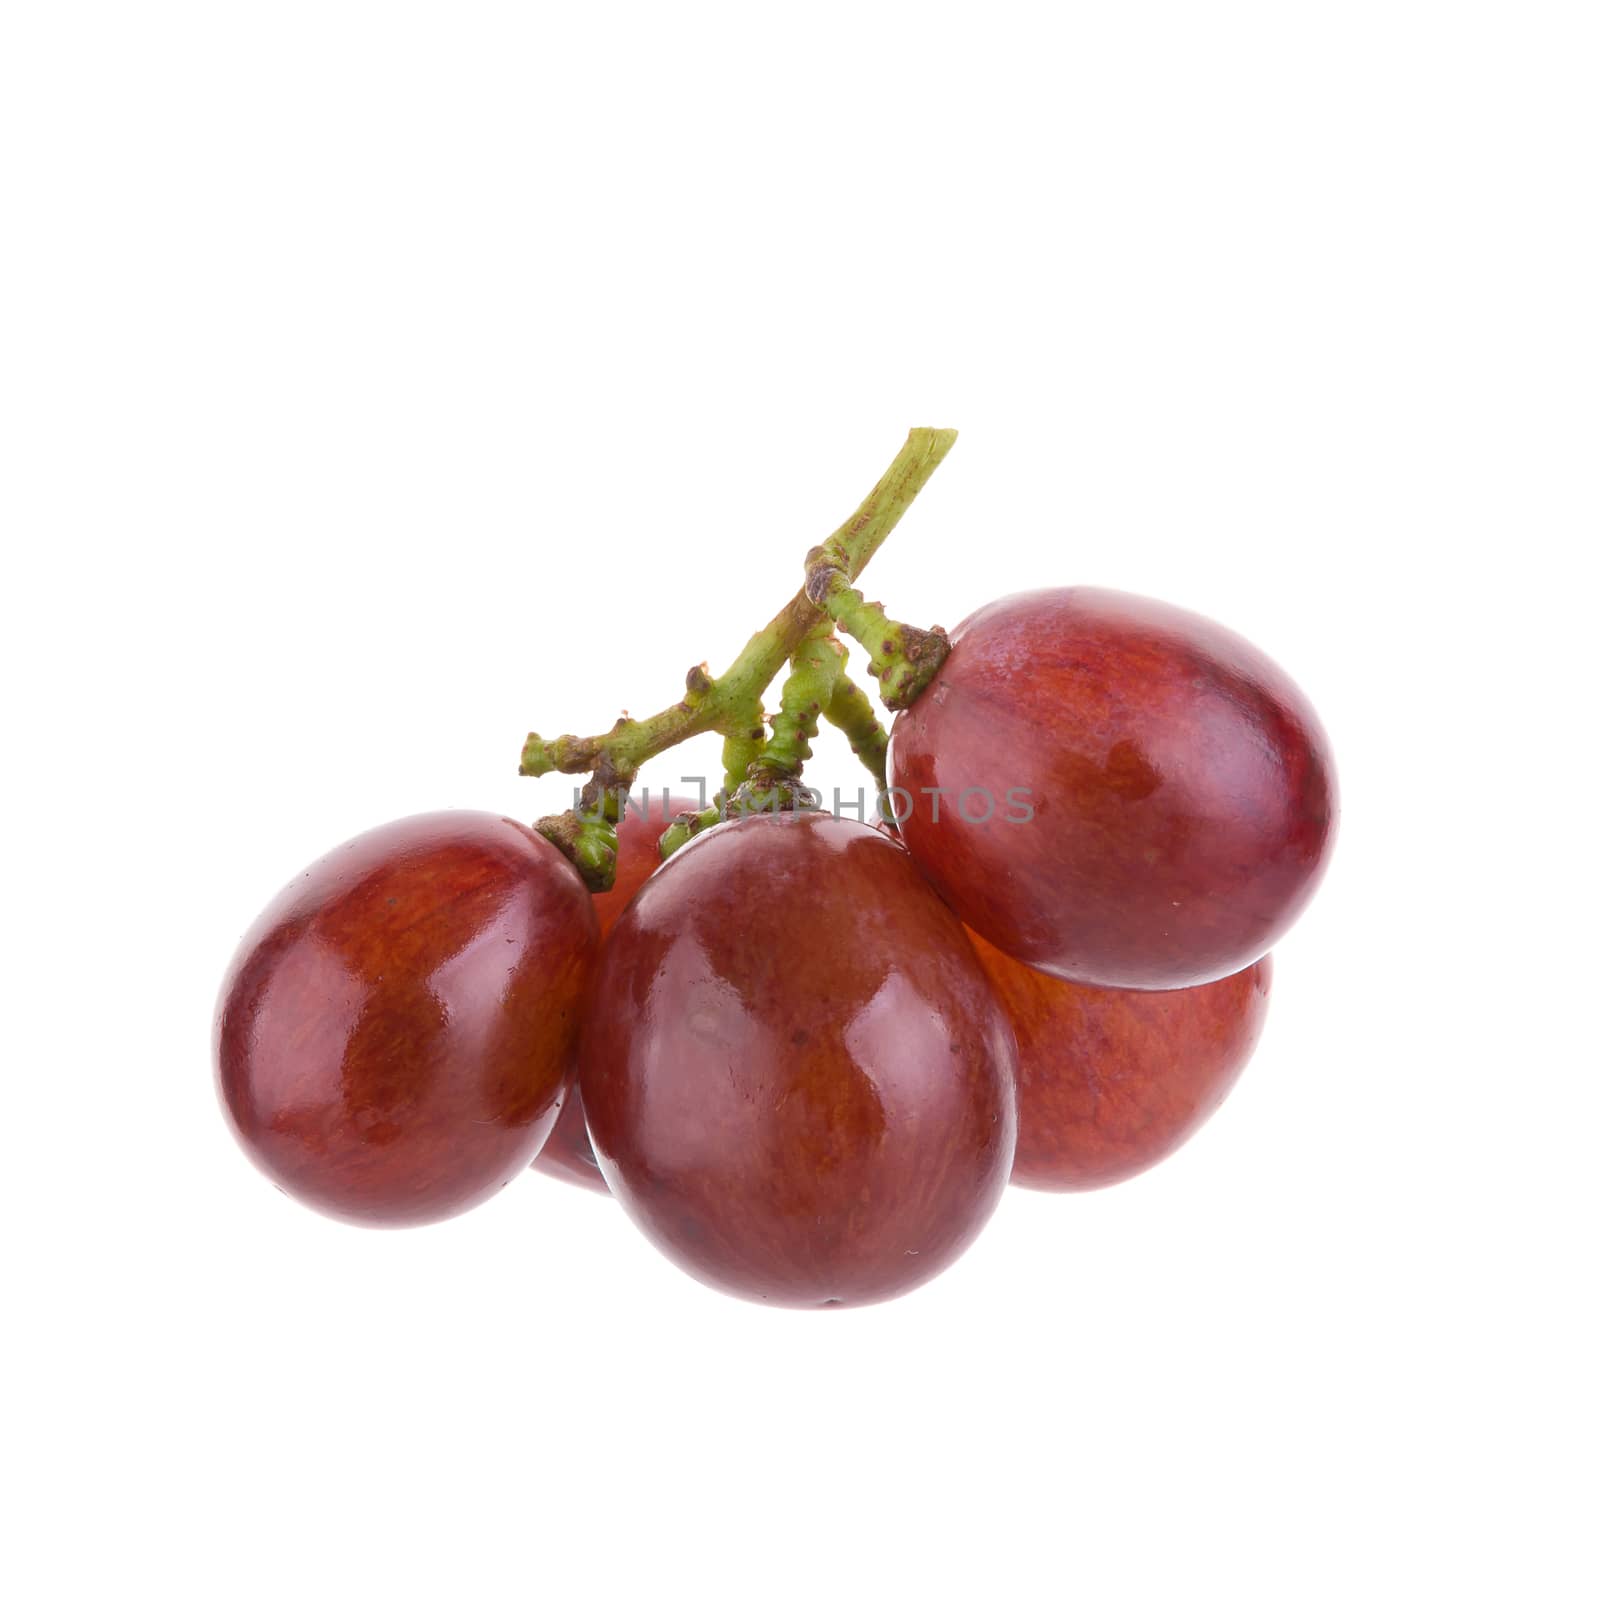 Red grapes isolated on over white background by kaiskynet